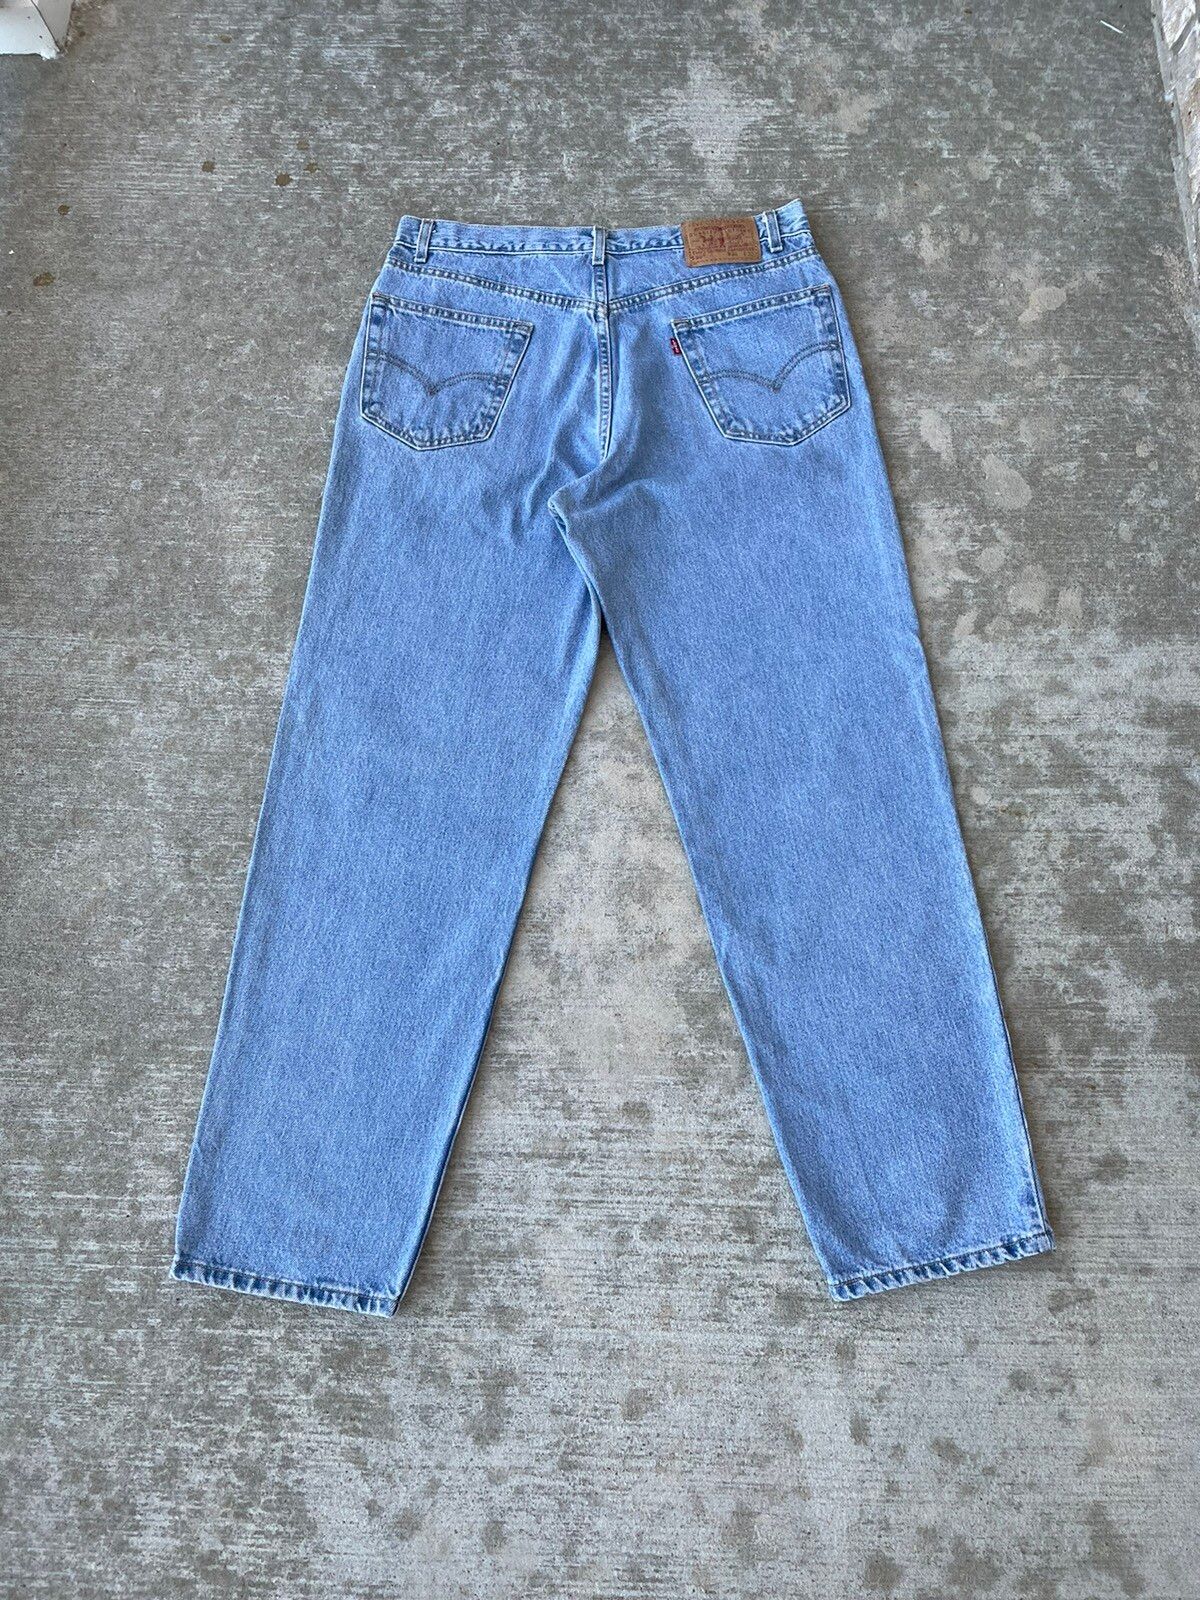 Vintage Vintage Levi’s 550 “Every Garment Guaranteed” Jeans | Grailed